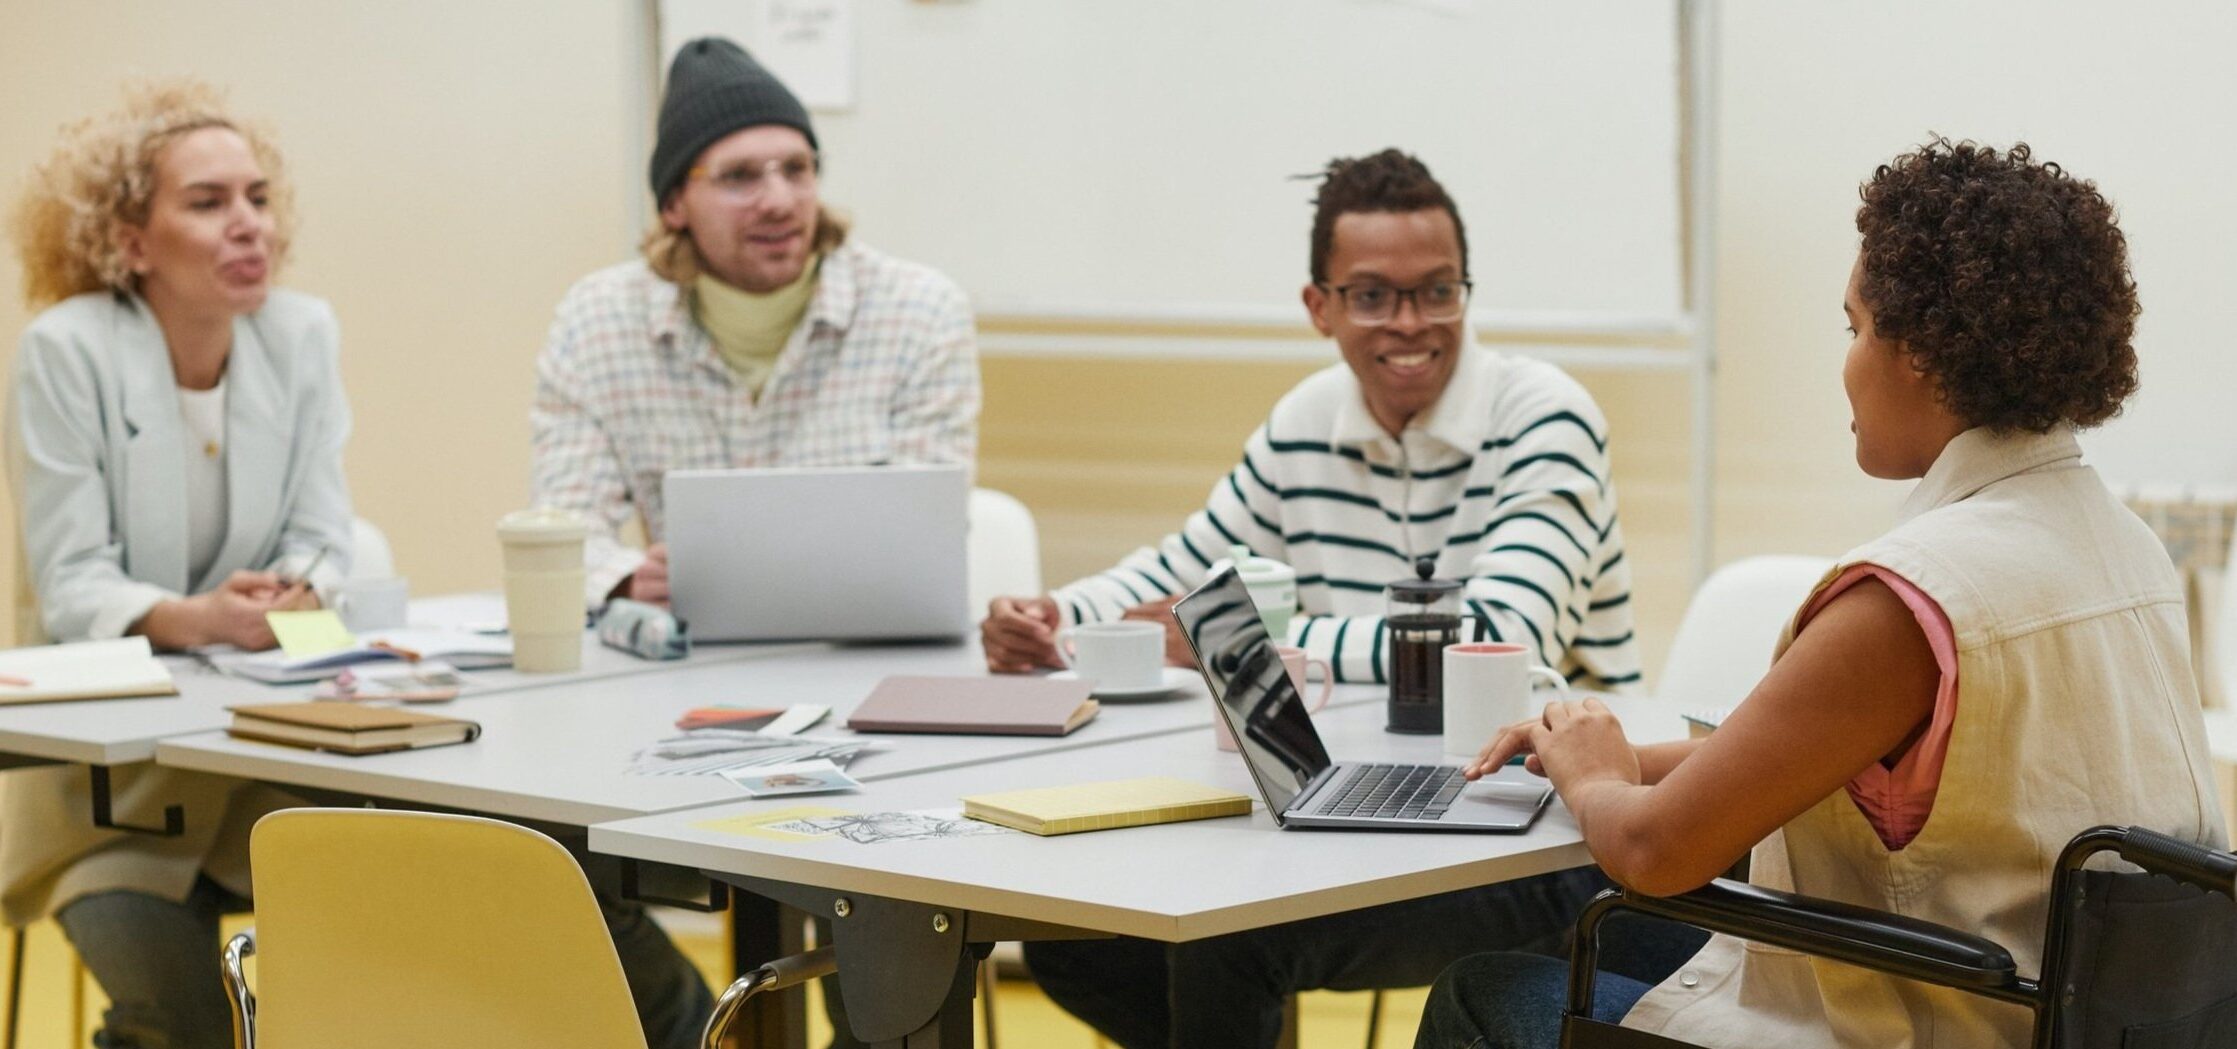 Diverse group of coworkers planning an event. From right to left: a blond white female, a blonde white male, a Black male with glasses, and a Black female seated in a wheelchair.